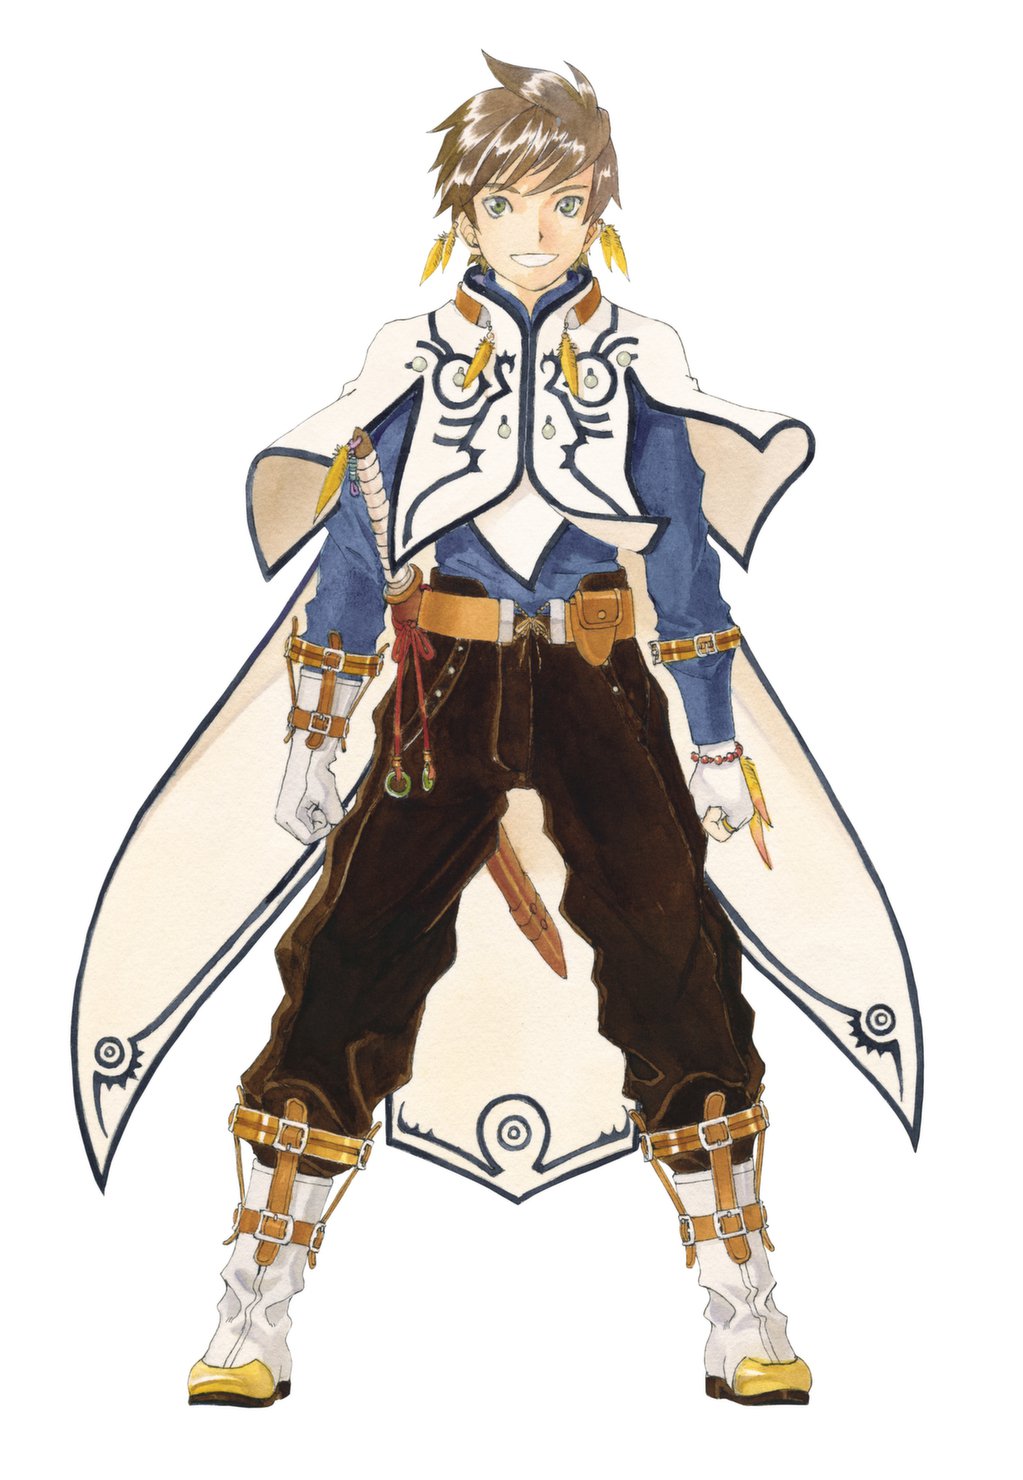 Tales of Series on X: Meet Sorey - a human raised by the Seraphim - and  Mikleo, a Seraph of Water and Sorey's childhood friend. They start a  journey together after a